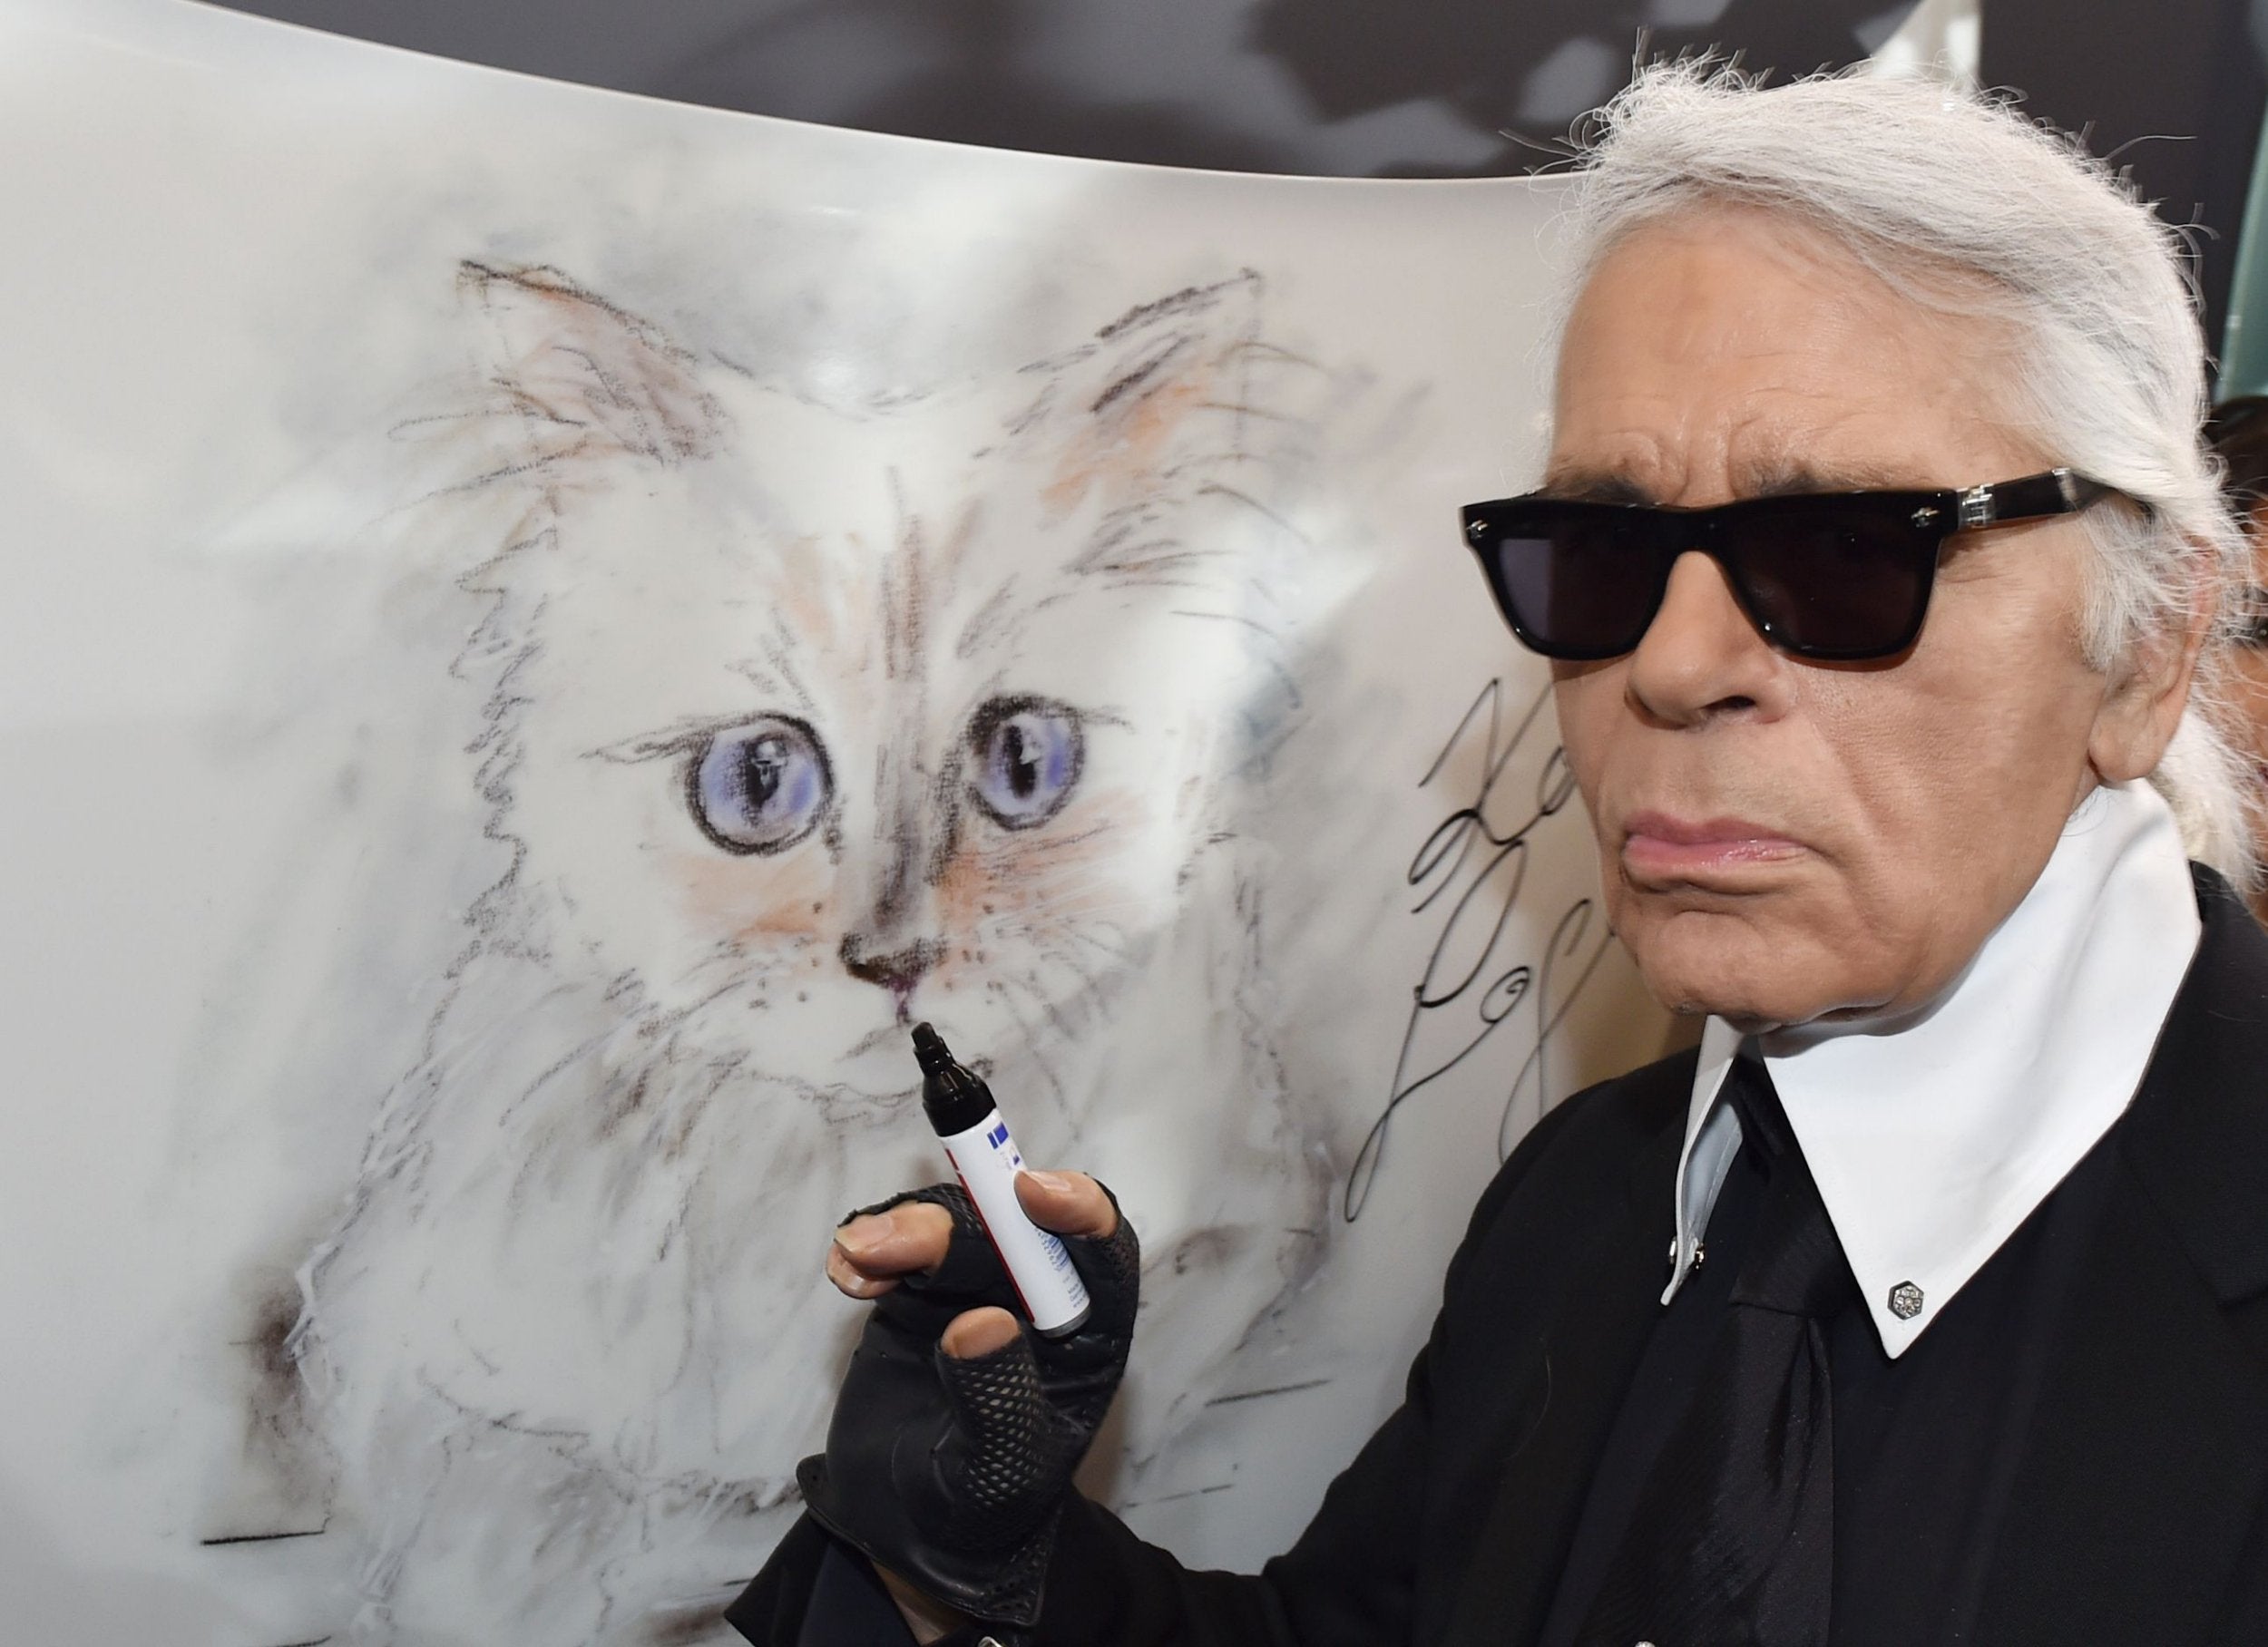 A tribute to my great friend Karl Lagerfeld